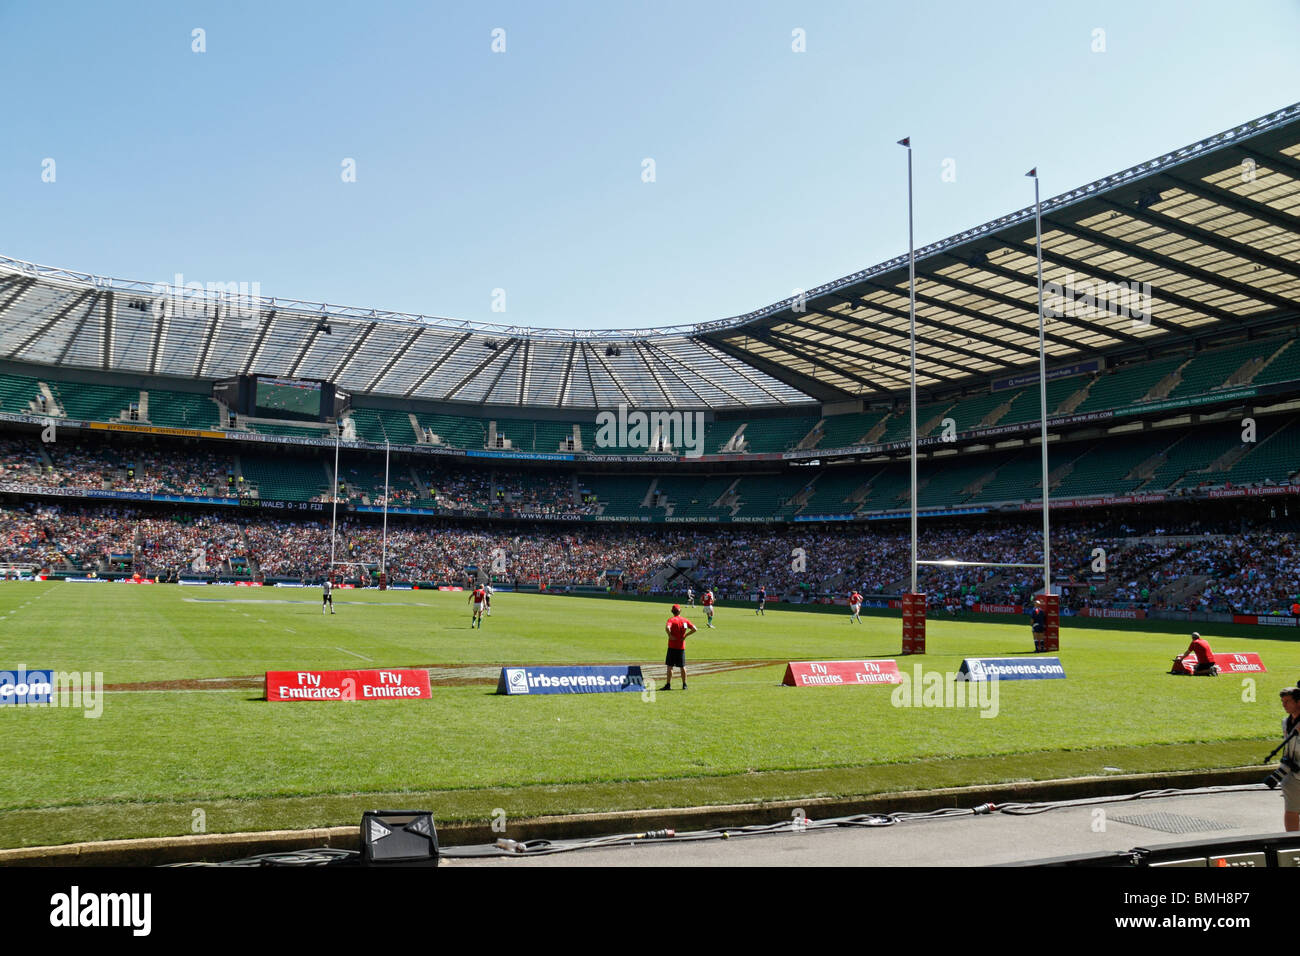 A pitchside view of  Twickenham rugby stadium, home of English International rugby, in south west London, UK Stock Photo